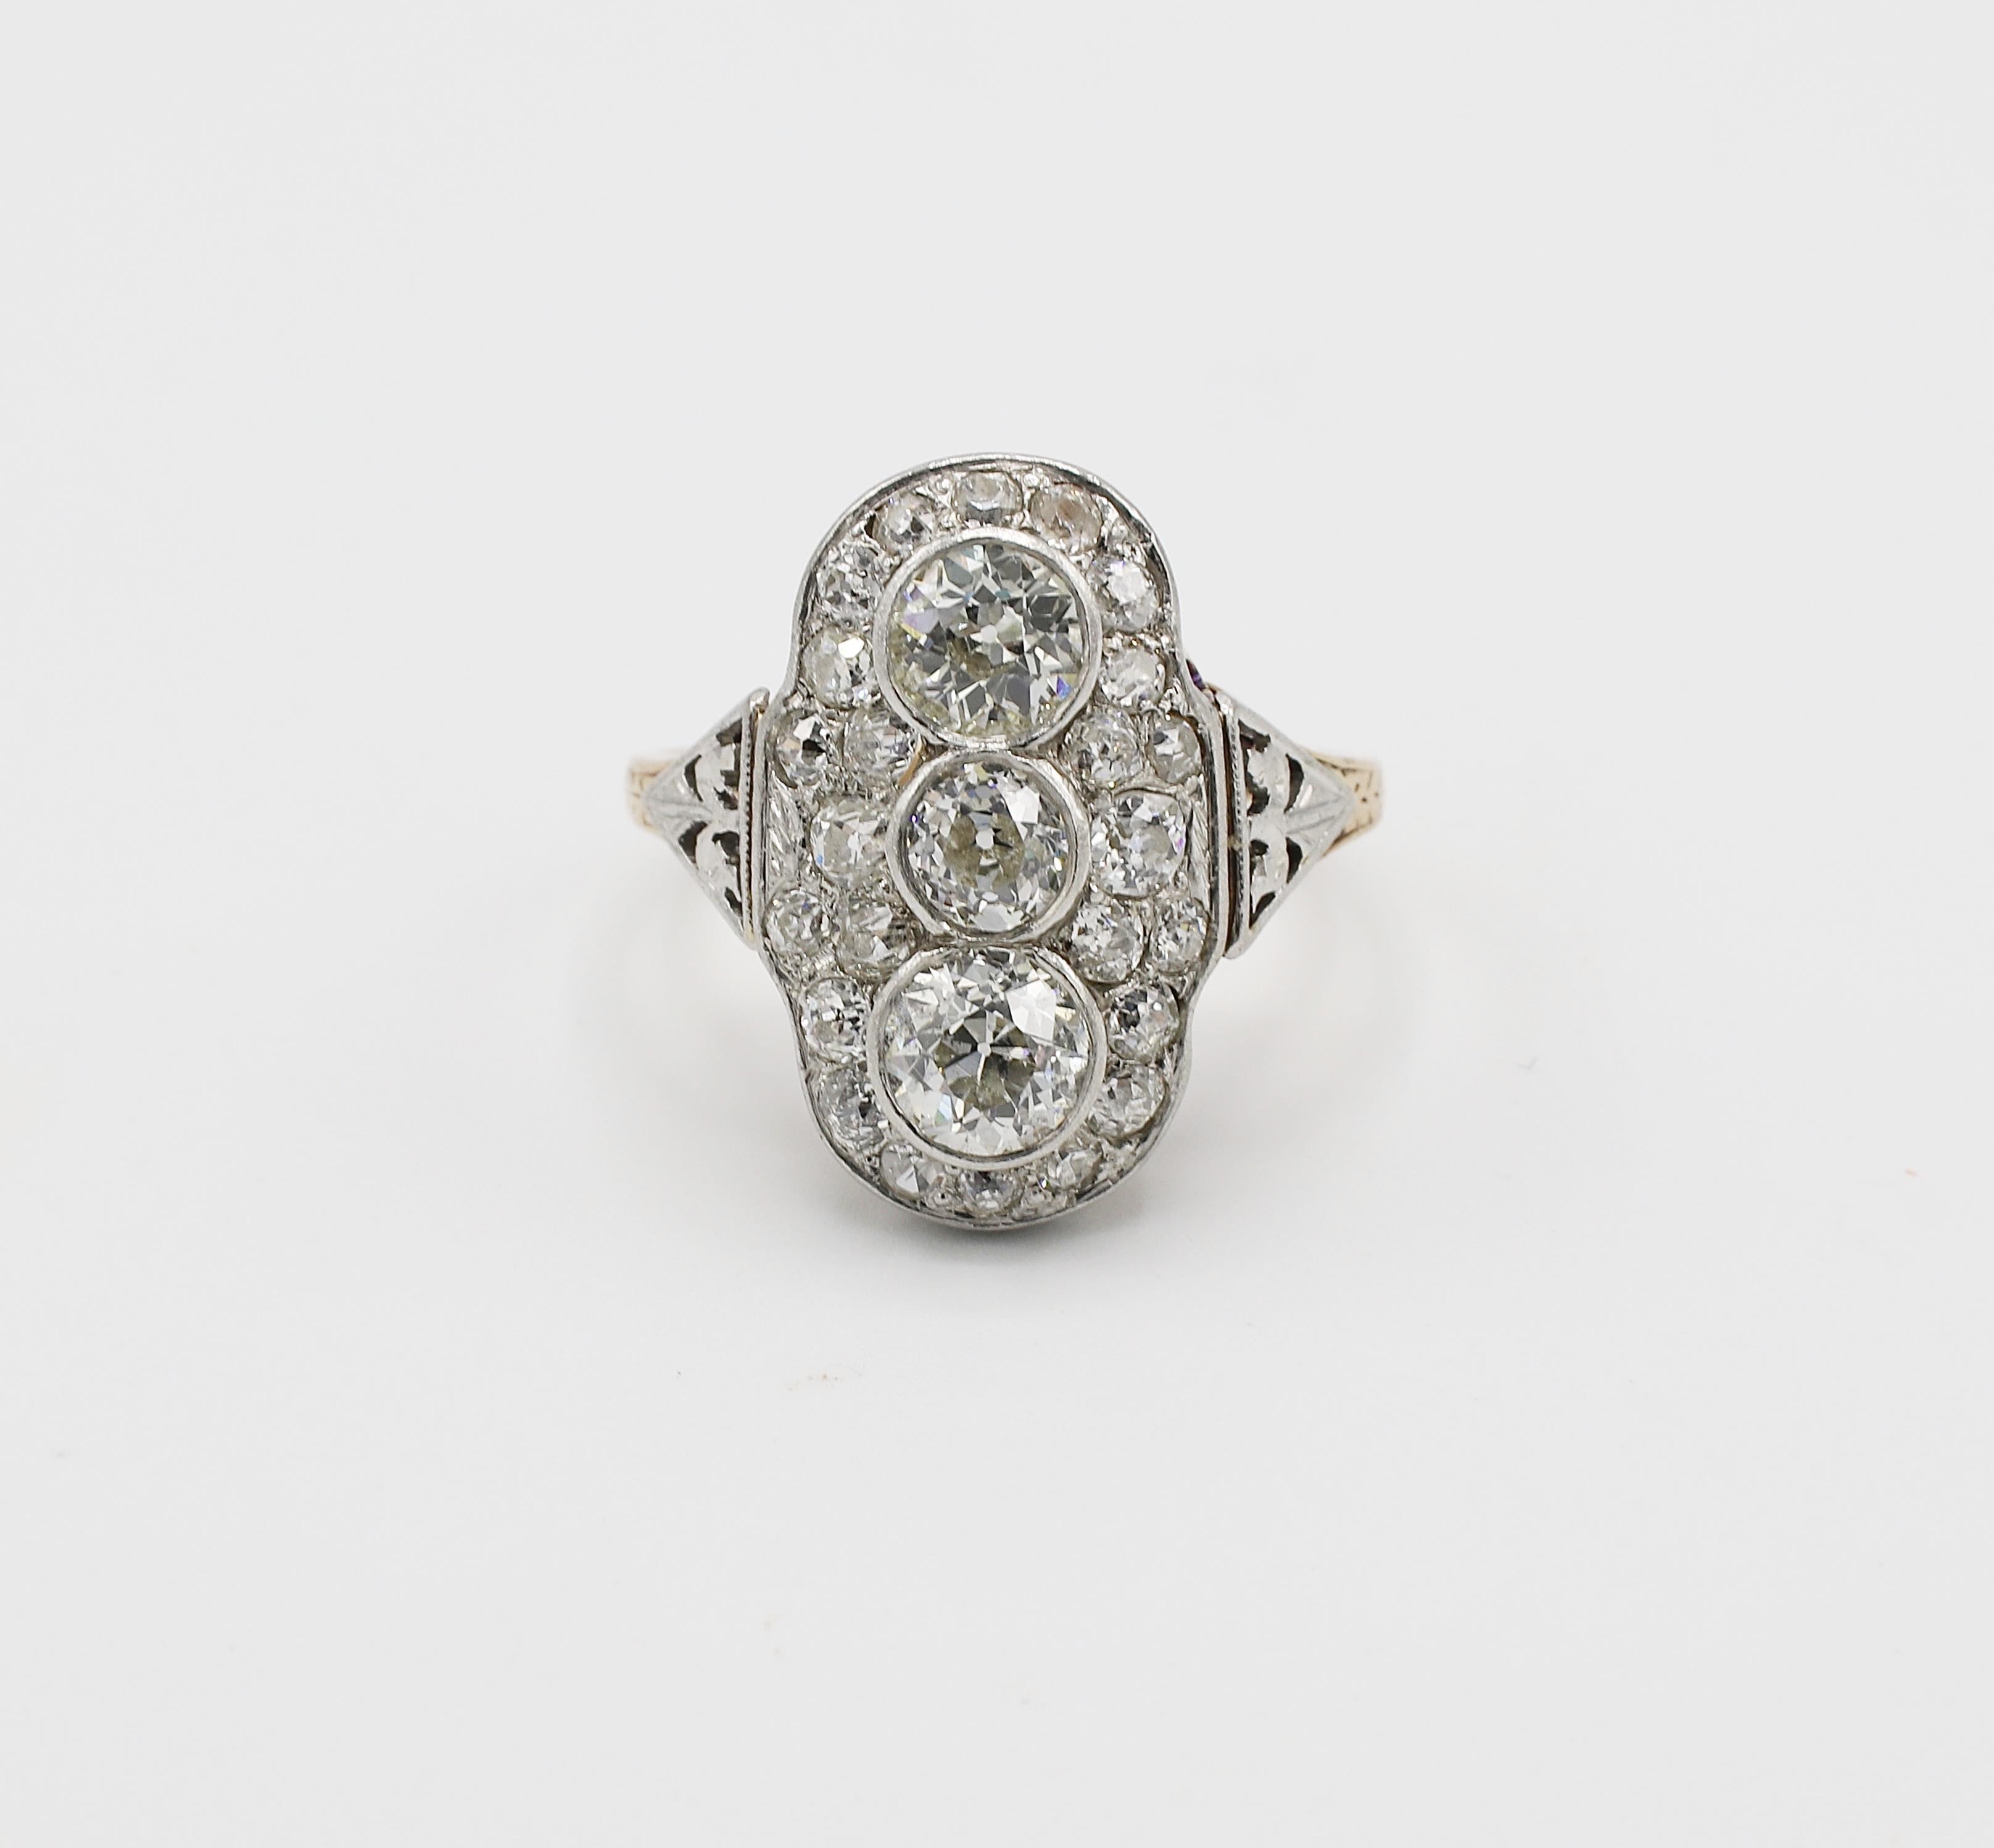 Antique Art Deco Platinum & Gold 2.25 CTW Old European Cut Diamond Cocktail Ring Size 7.75
Metal: 14k yellow gold & platinum 
Weight: 5.89 grams
Diamonds: Approx. 2.25 CTW I-J  SI 
Size: 7.75 (US)
Top of ring measures 20 x 12.5mm

